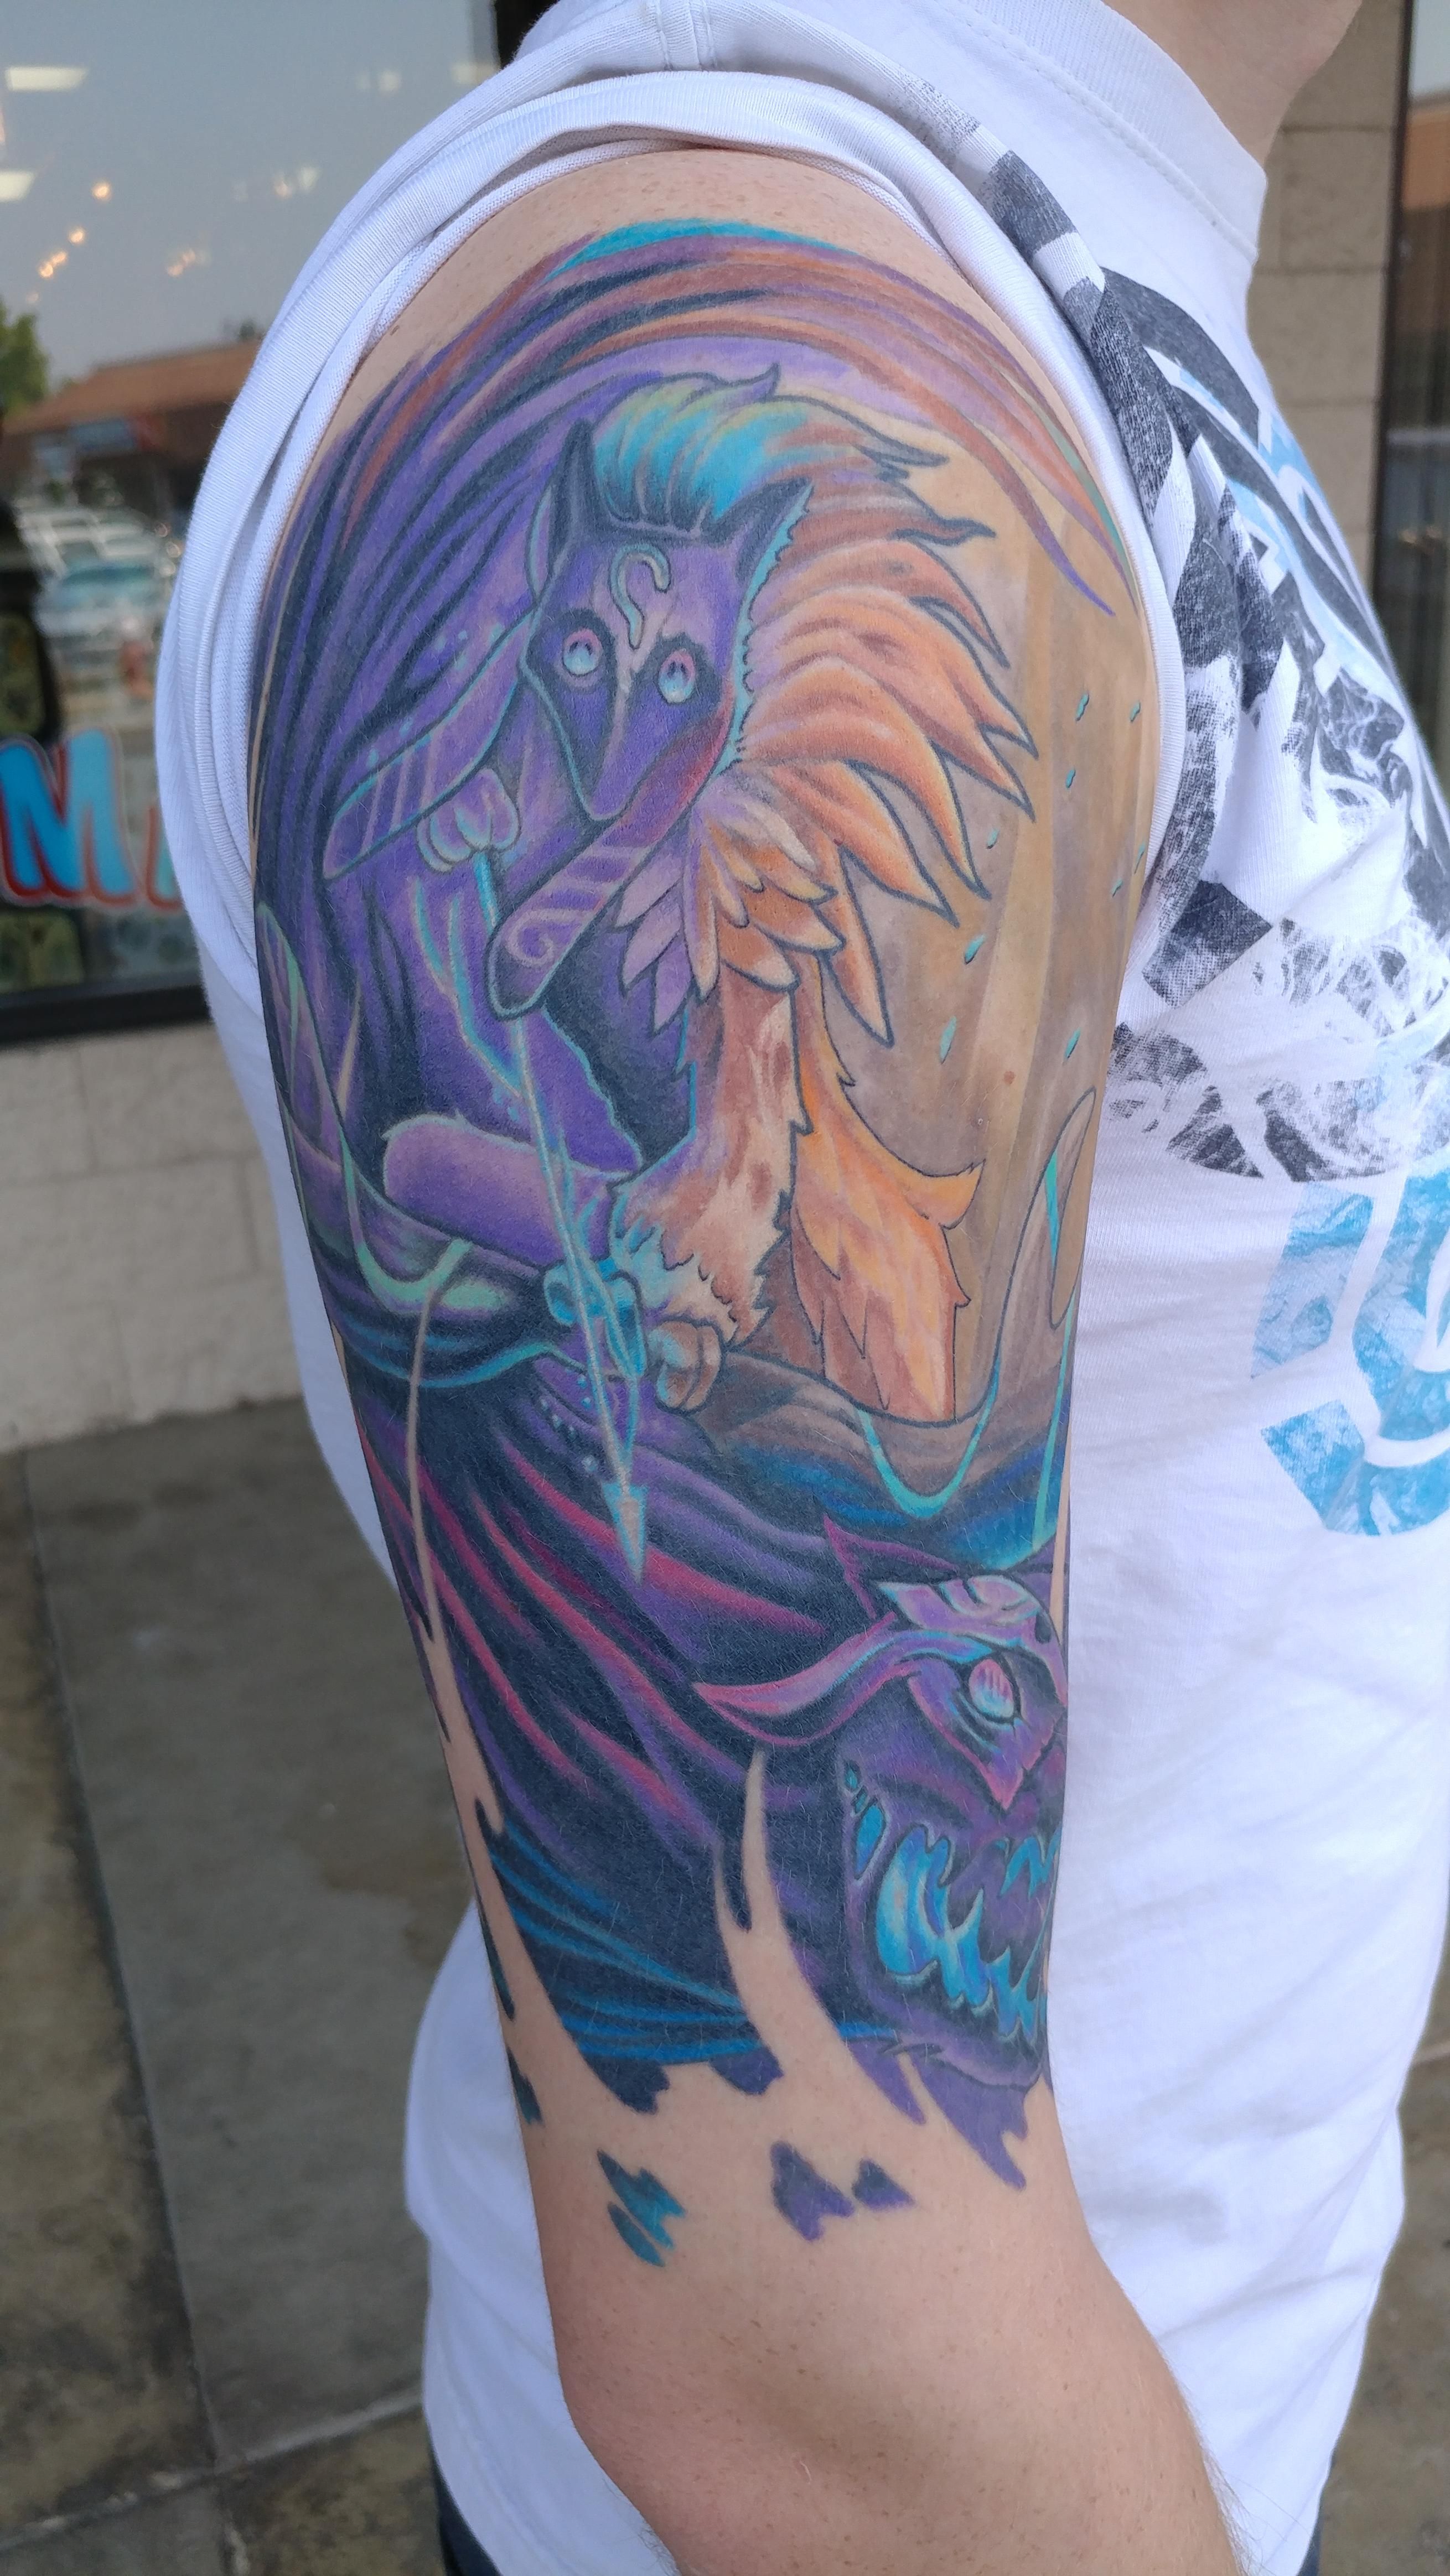 Kindred shoulder tattoo from League of Legends